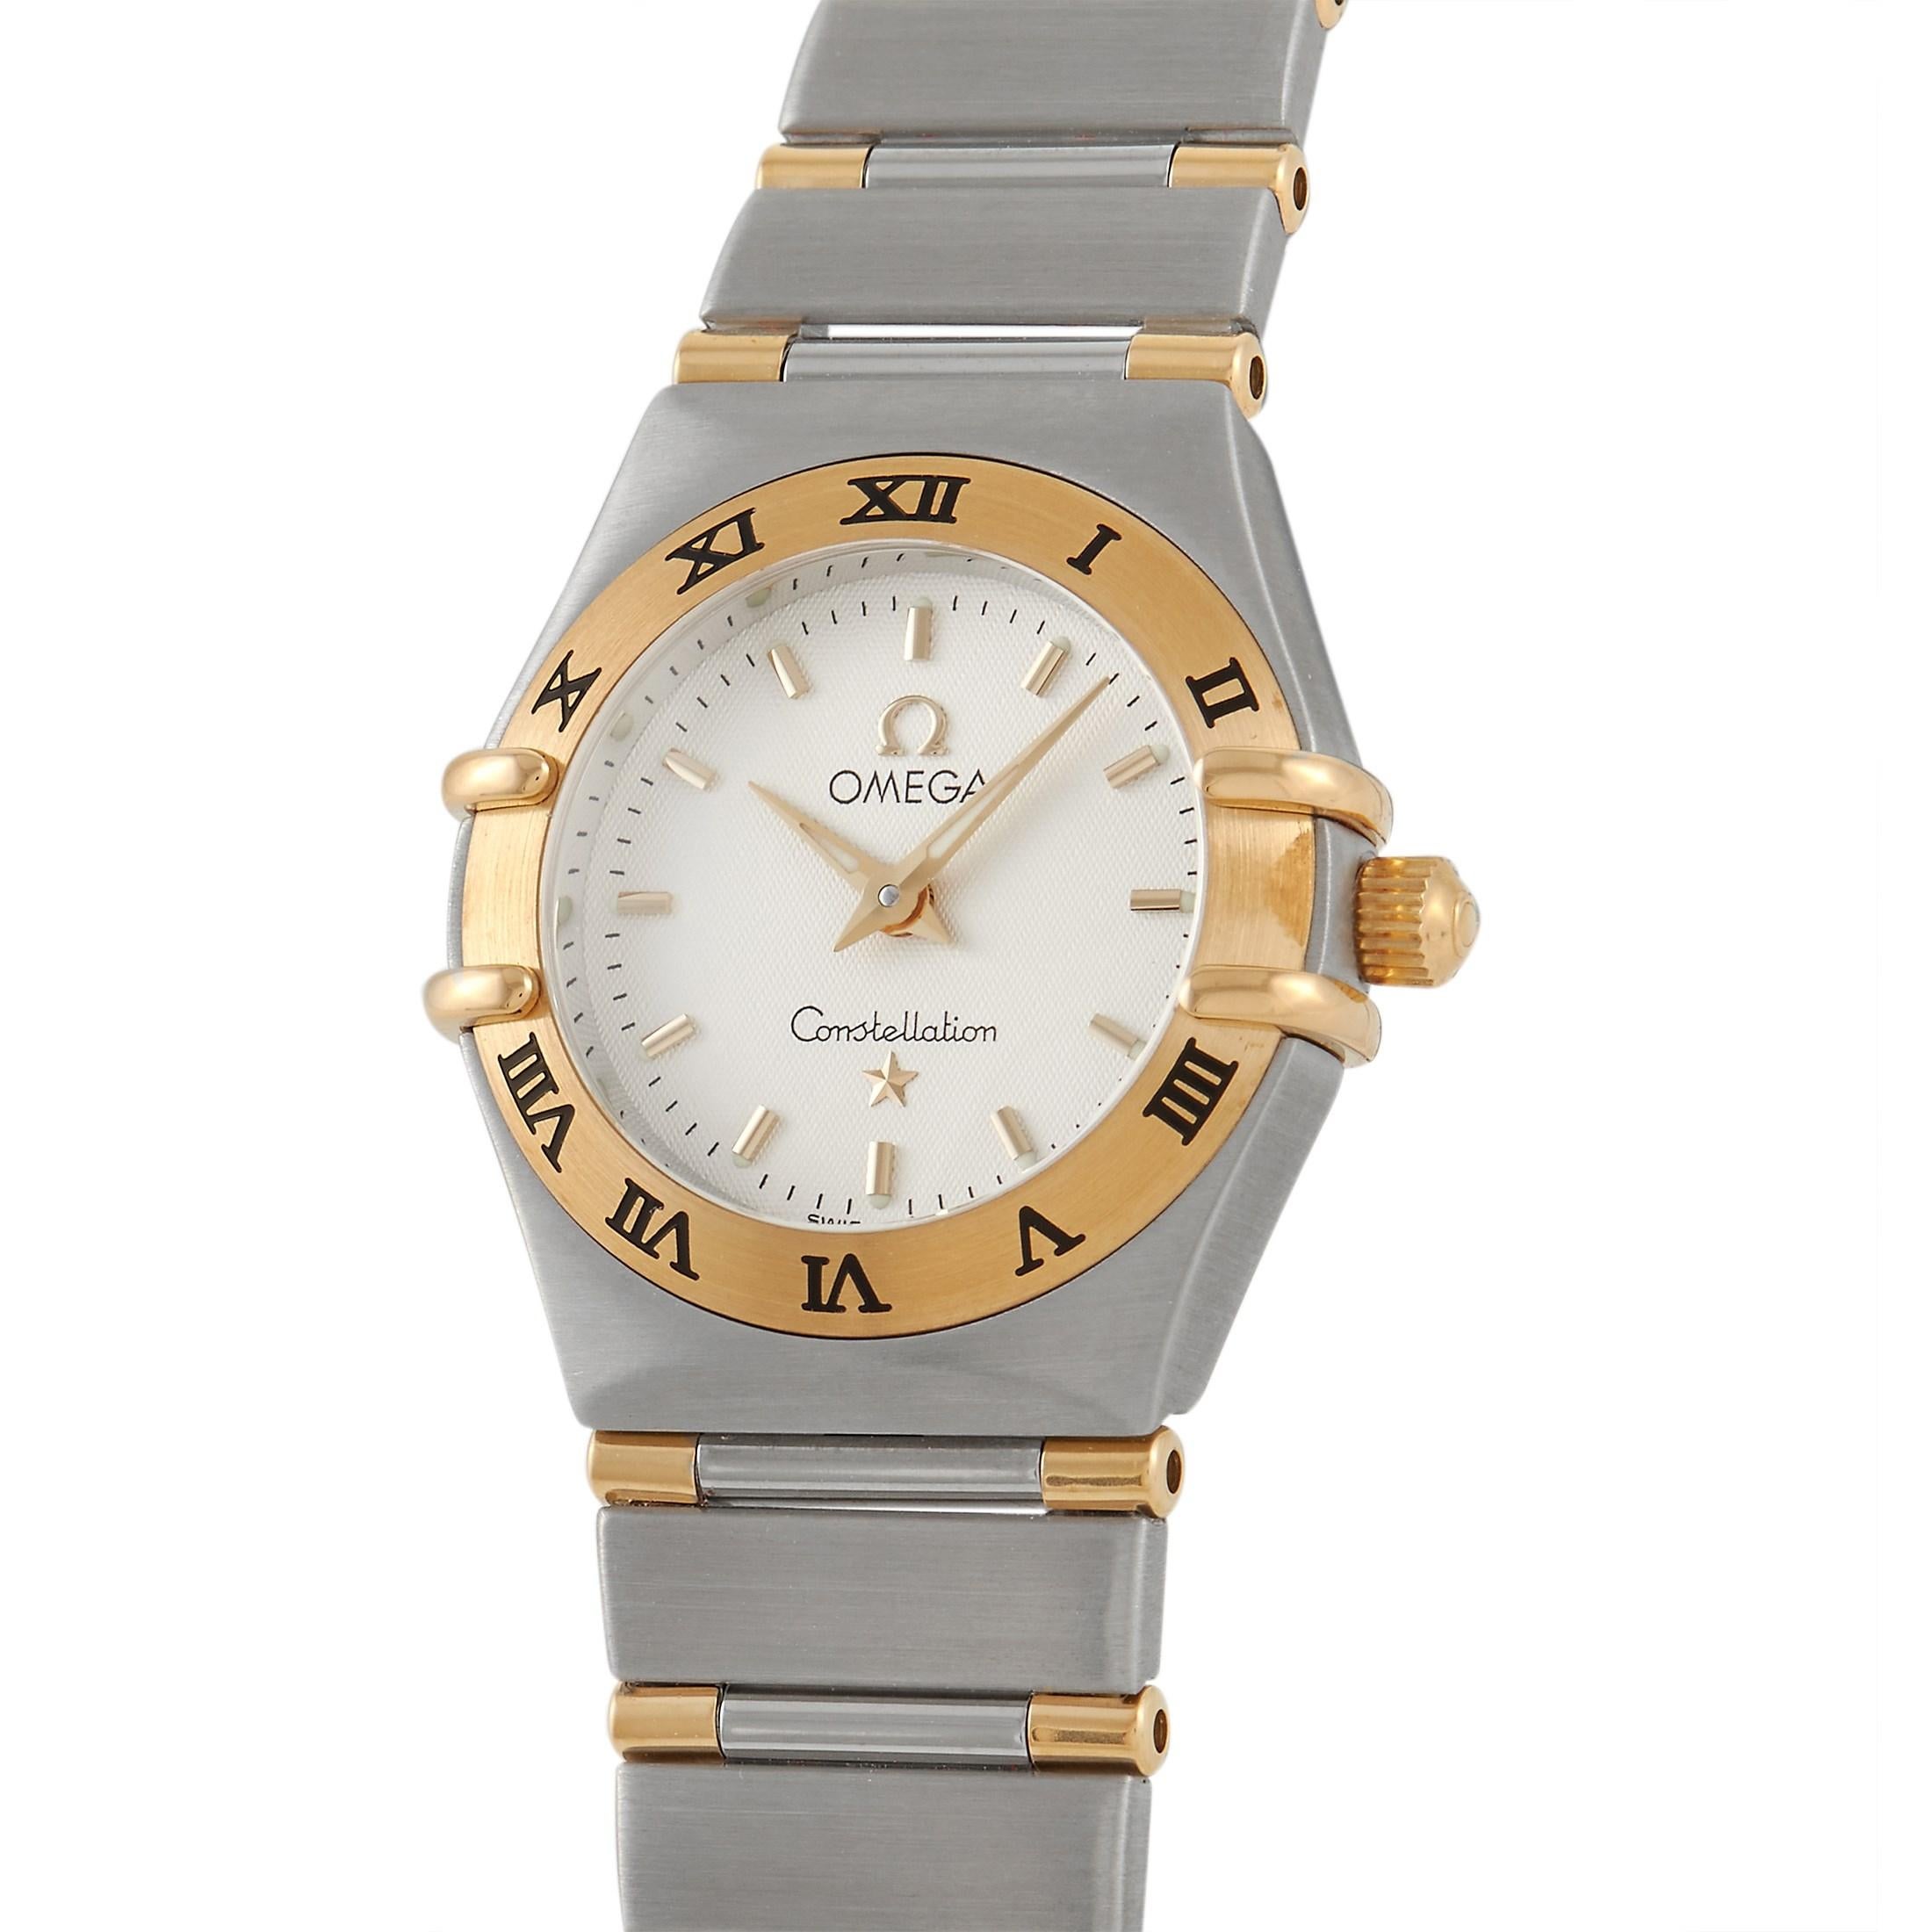 With a wonderfully feminine appeal, it will be easy to fall in love with the Omega Constellation Quartz Mini Ladies Watch 1362.30.00. This timepiece displays an exquisite two-toned finish. The 22.5mm case is fashioned in 316L stainless steel-yellow